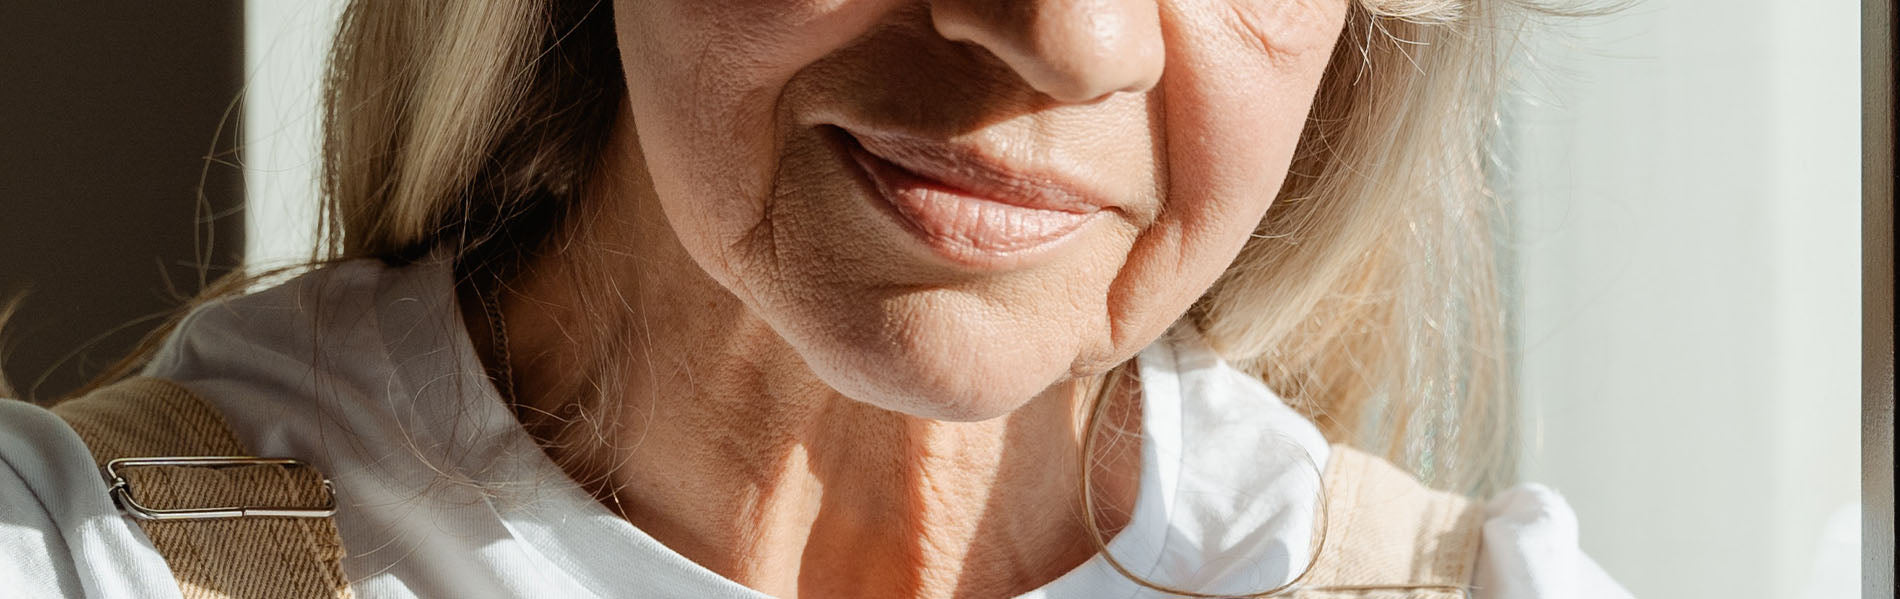 Here’s How to Prevent Stress Wrinkles, According to Experts